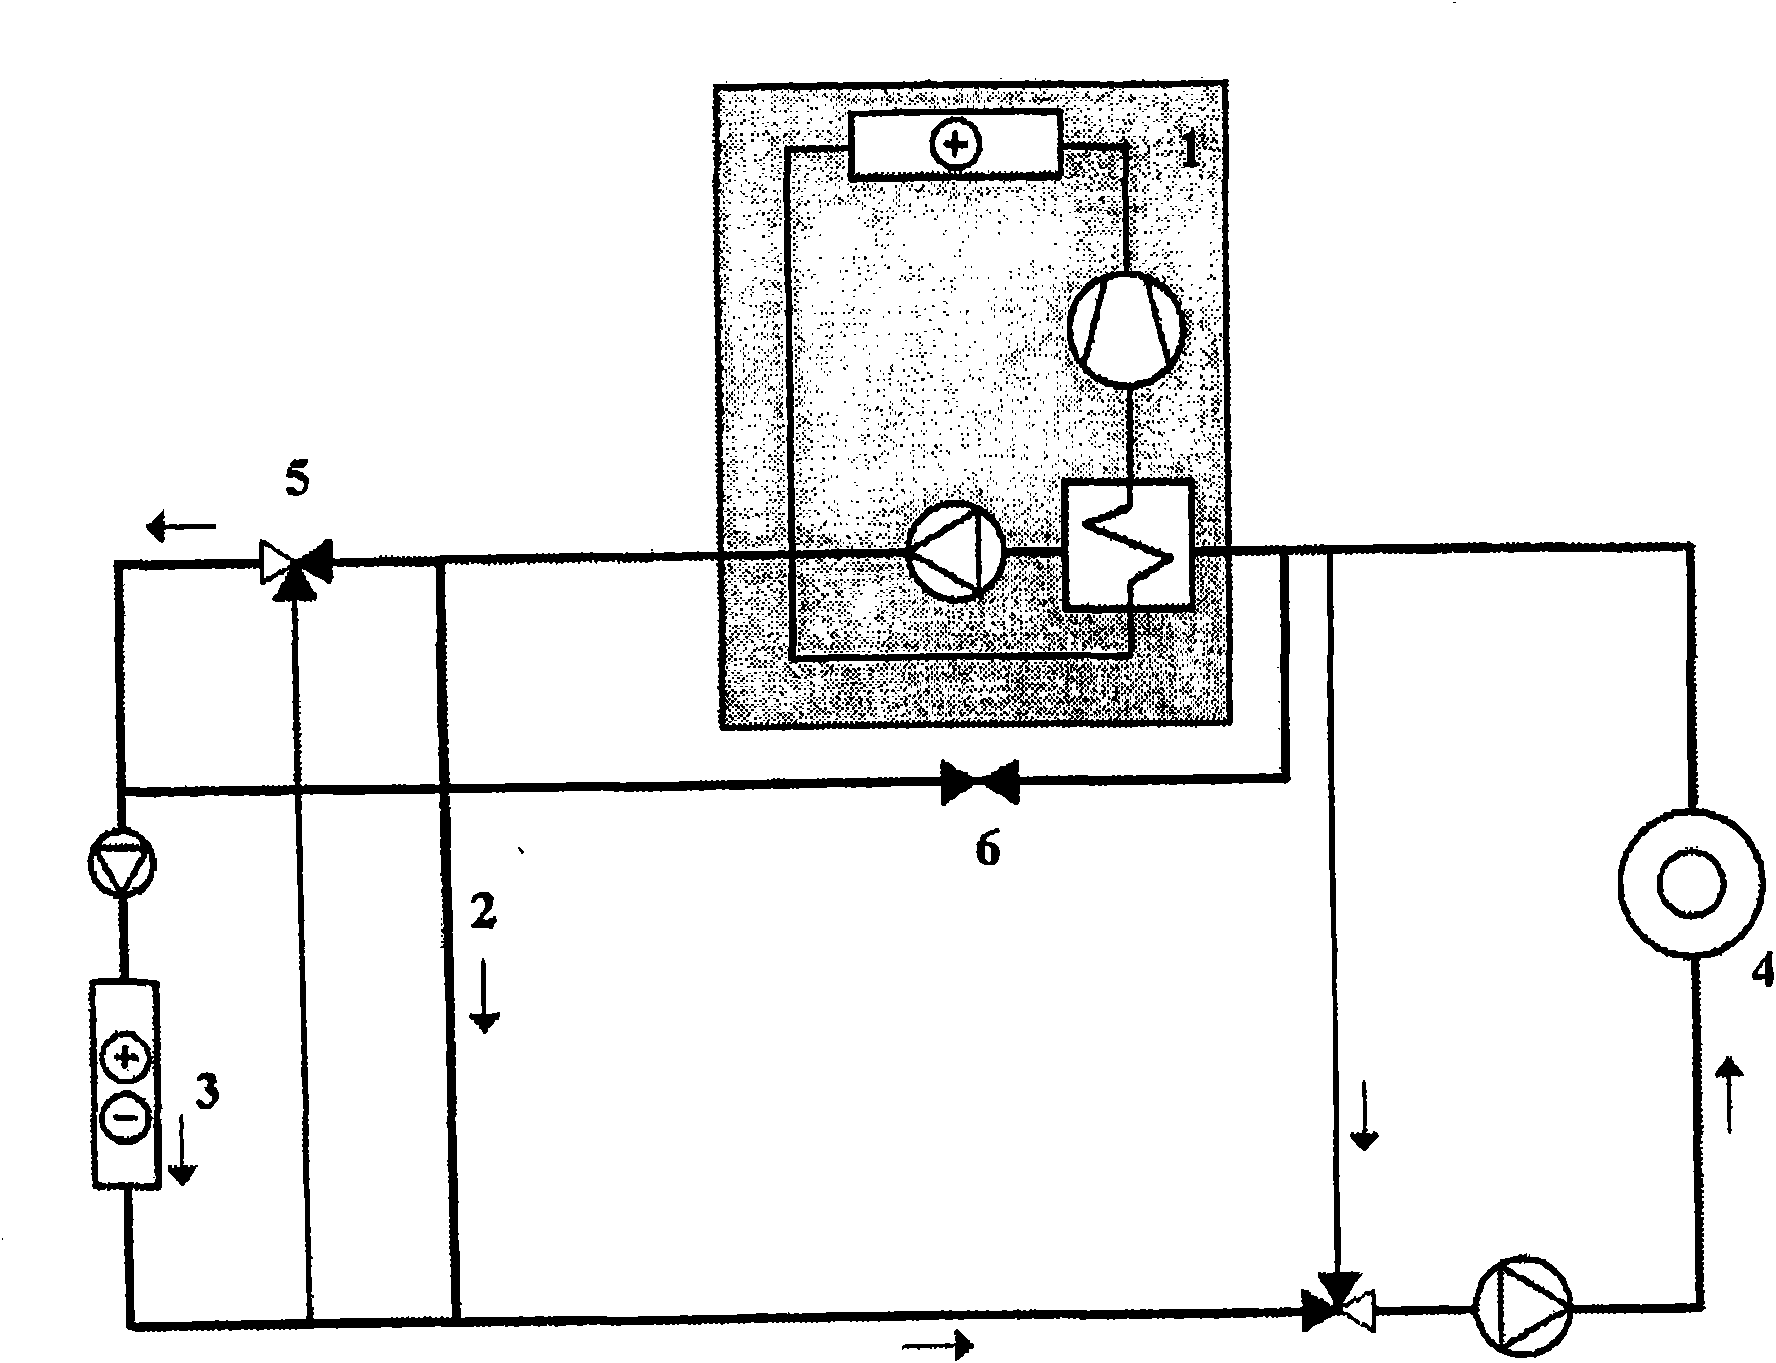 Method for using outdoor air to cool room devices